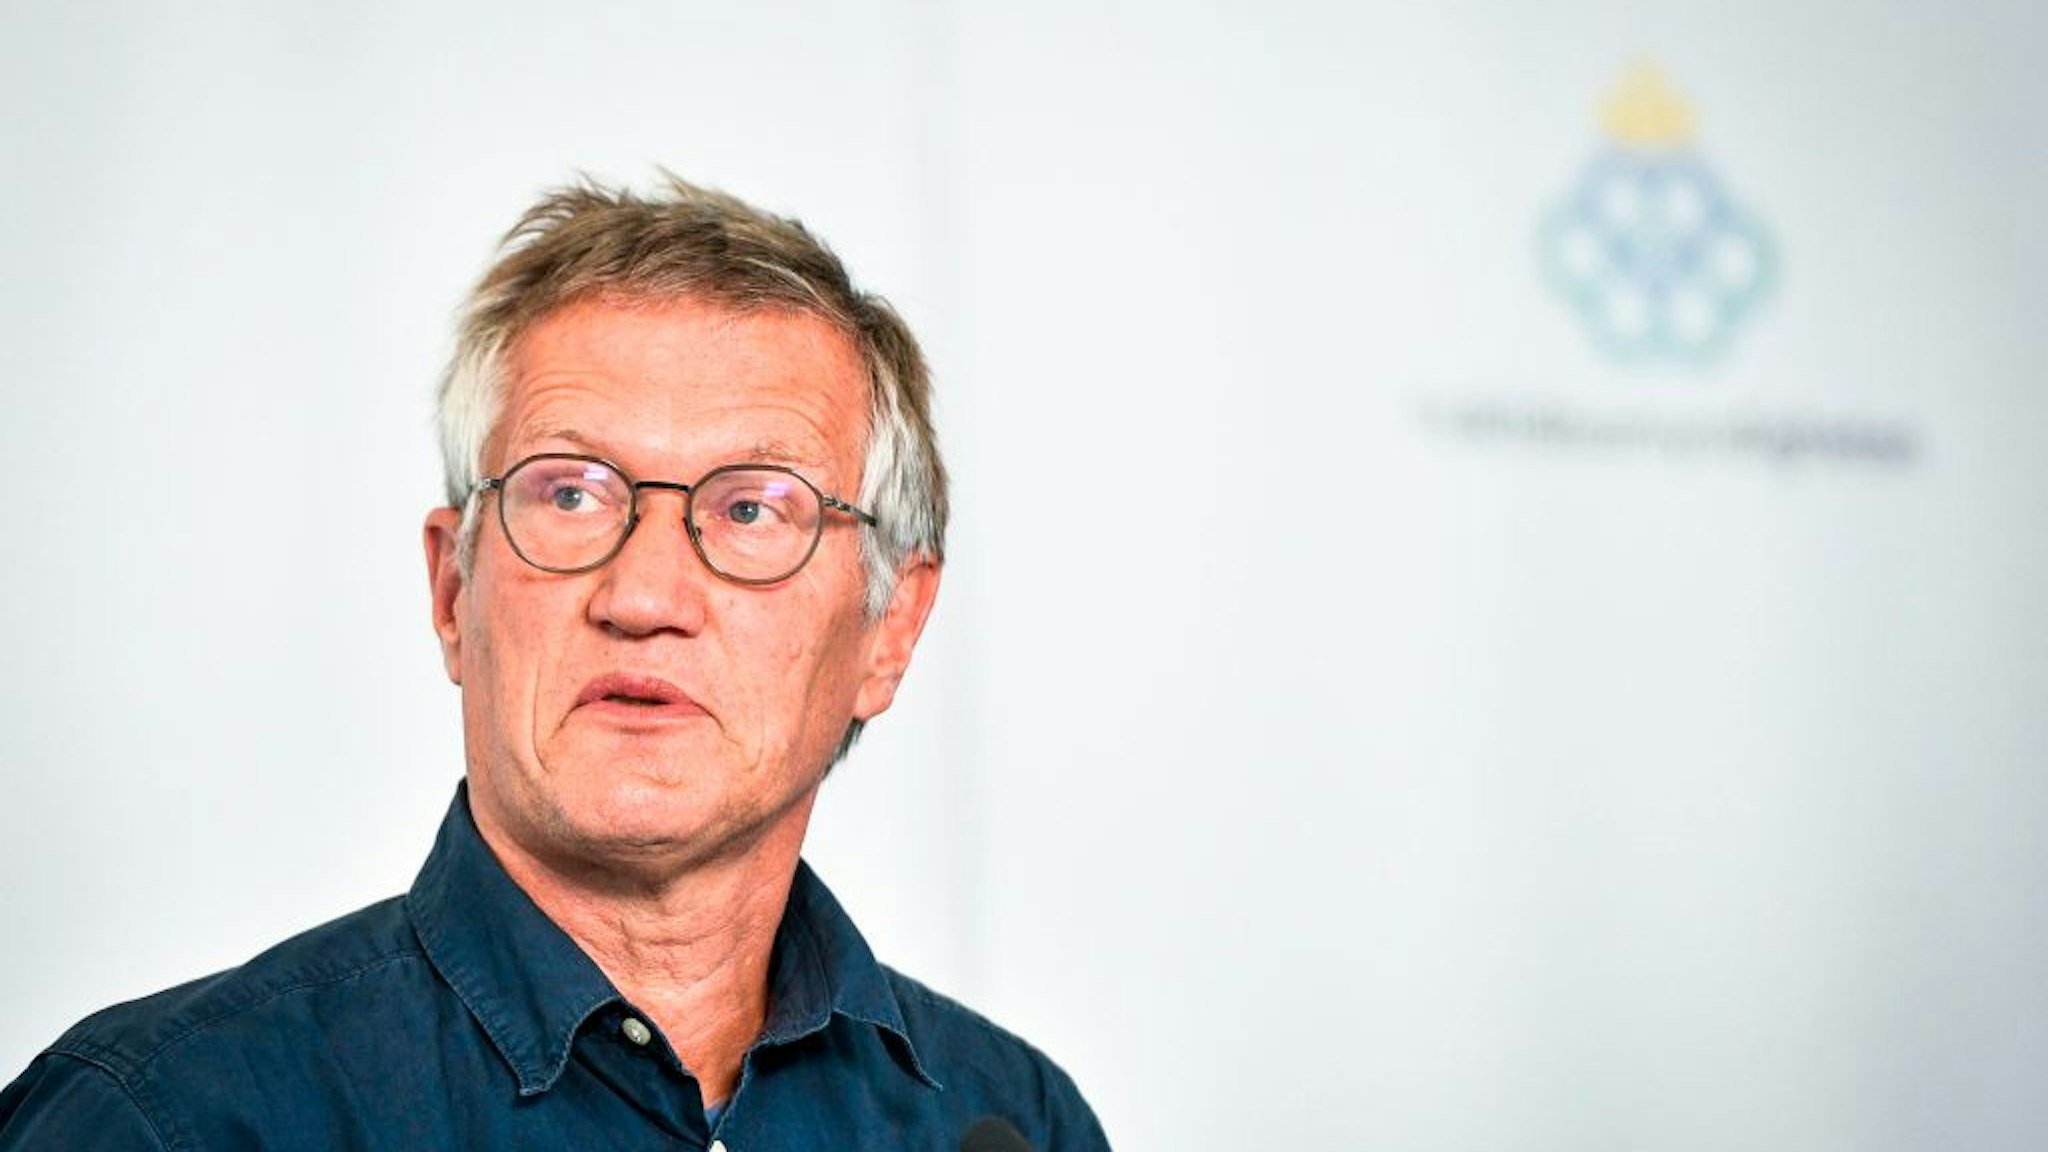 State epidemiologist Anders Tegnell of the Public Health Agency of Sweden speaks during a news conference on updated recommendations to curb the spread of the novel coronavirus that can cause the Covid-19 disease, on July 30, 2020 in Stockholm.